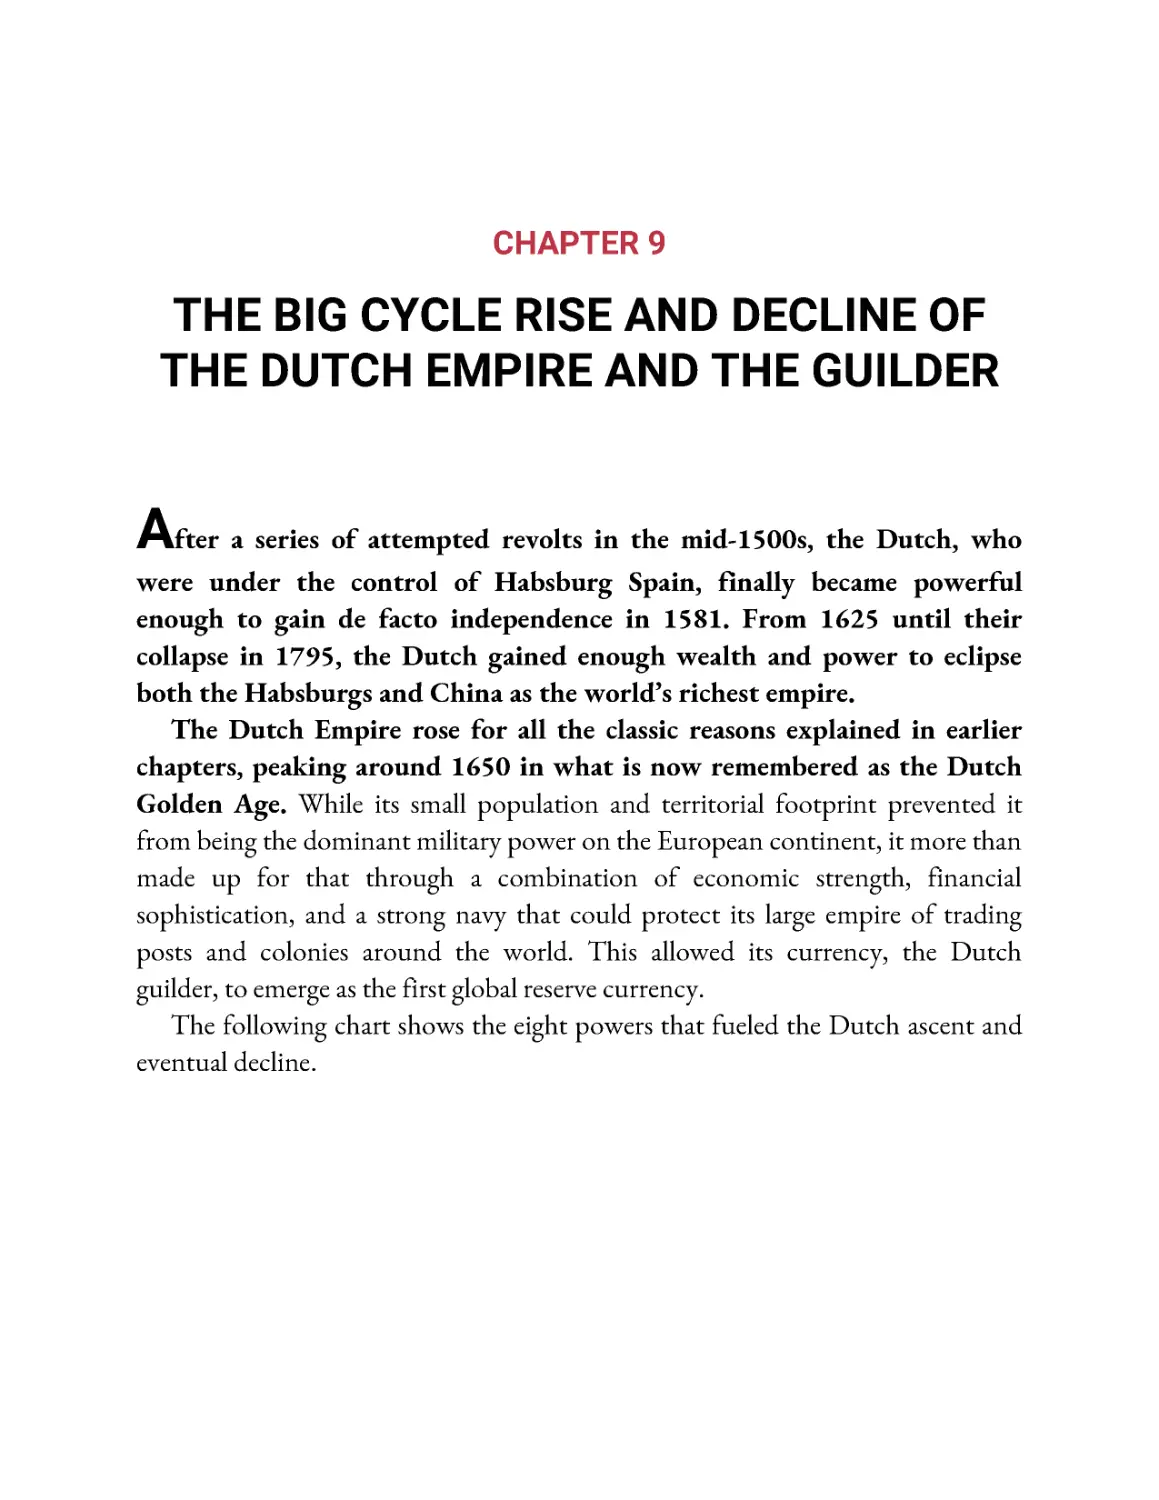 ﻿Chapter 9: The Big Cycle Rise and Decline of the Dutch Empire and the Guilde